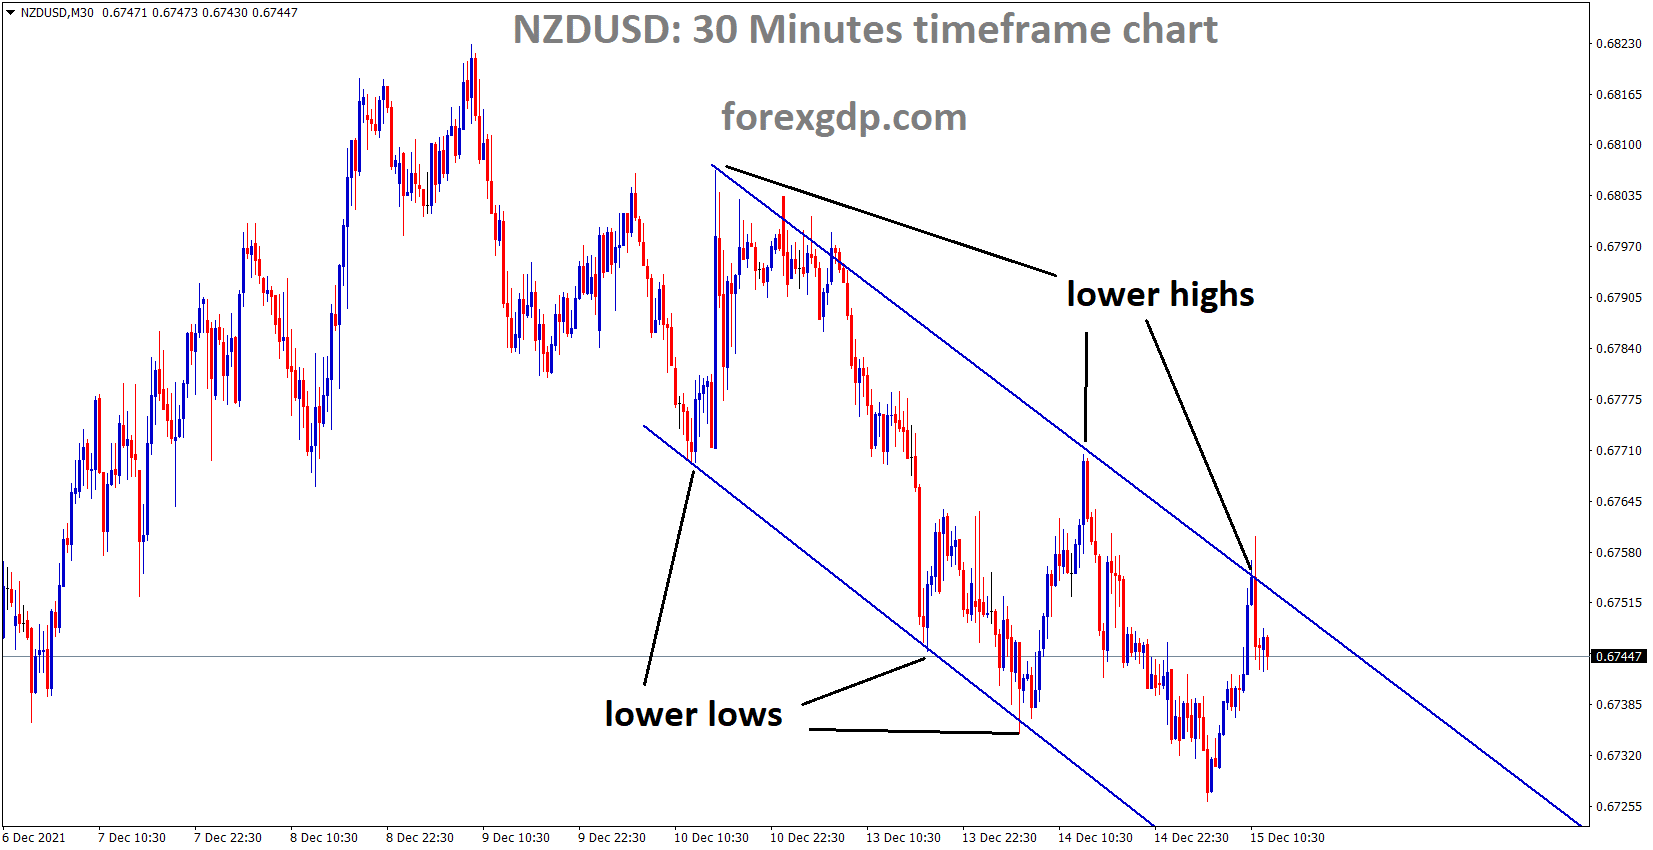 NZDUSD is moving in the Descending channel and the market fell from the lower high area of the channel